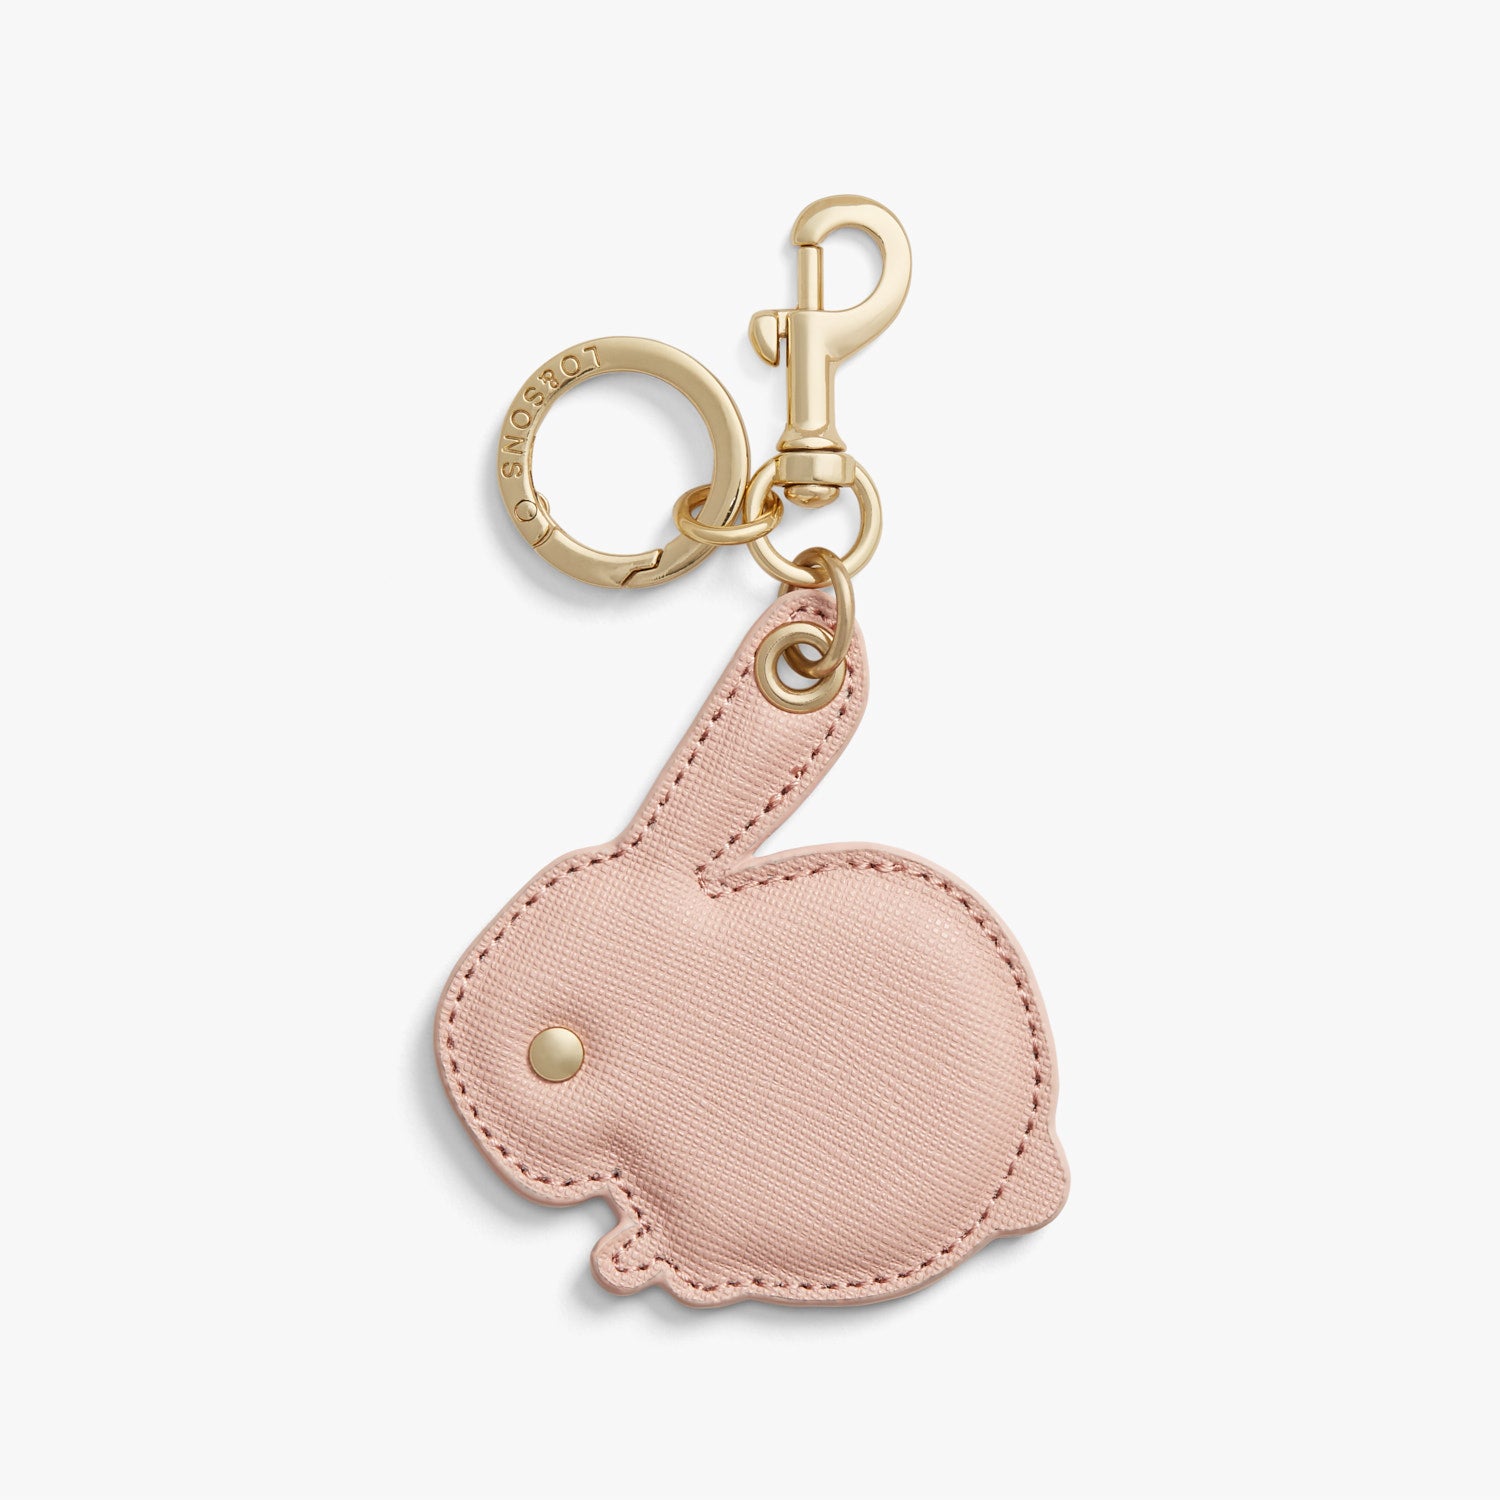 Louis Vuitton Gold And Rose Quartz Bag Charm Available For